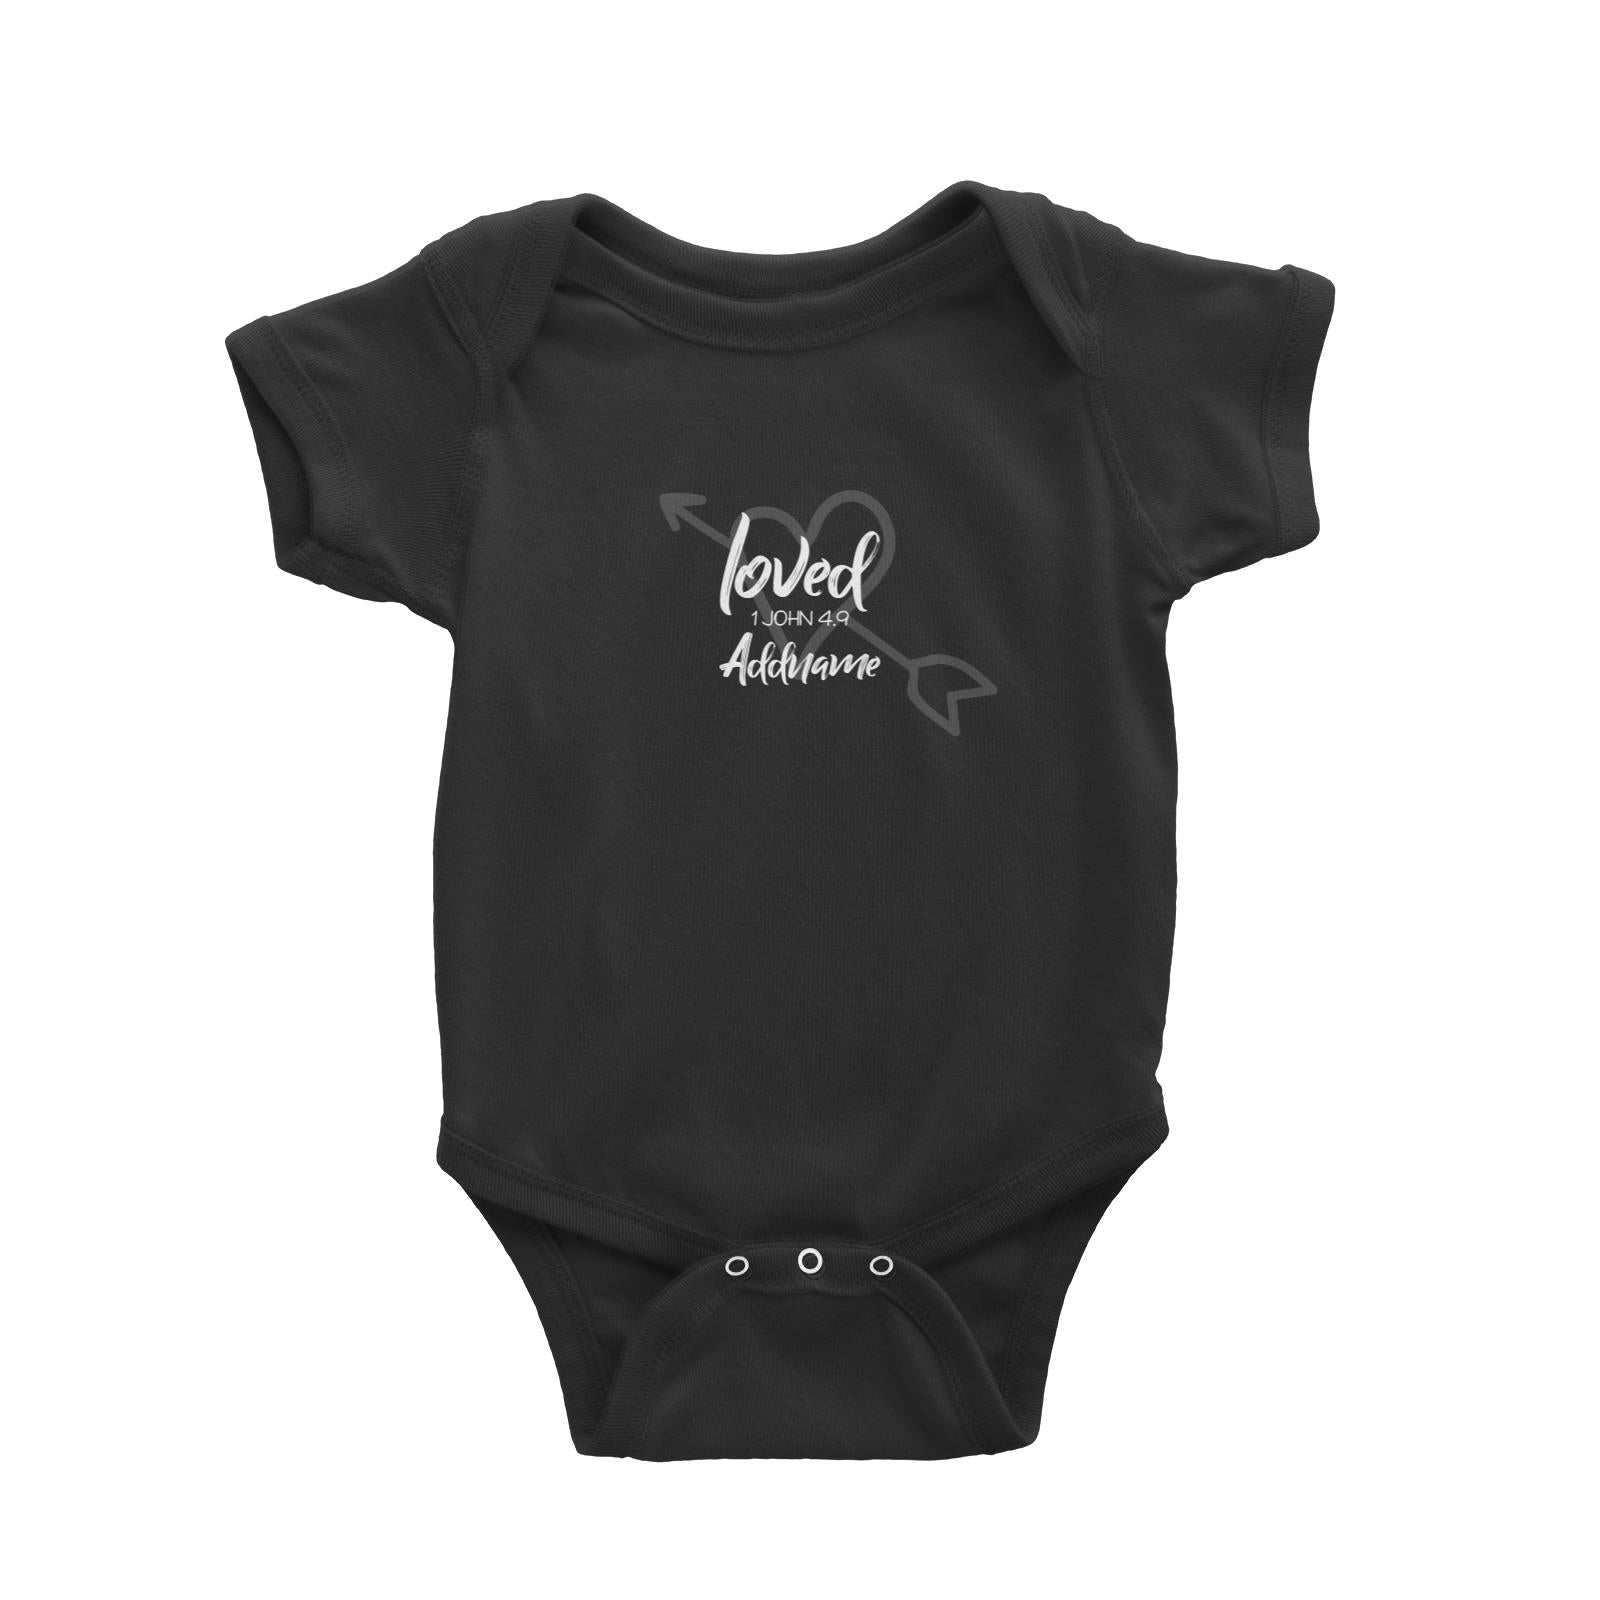 Loved Family Loved With Heart And Arrow 1 John 4.9 Addname Baby Romper